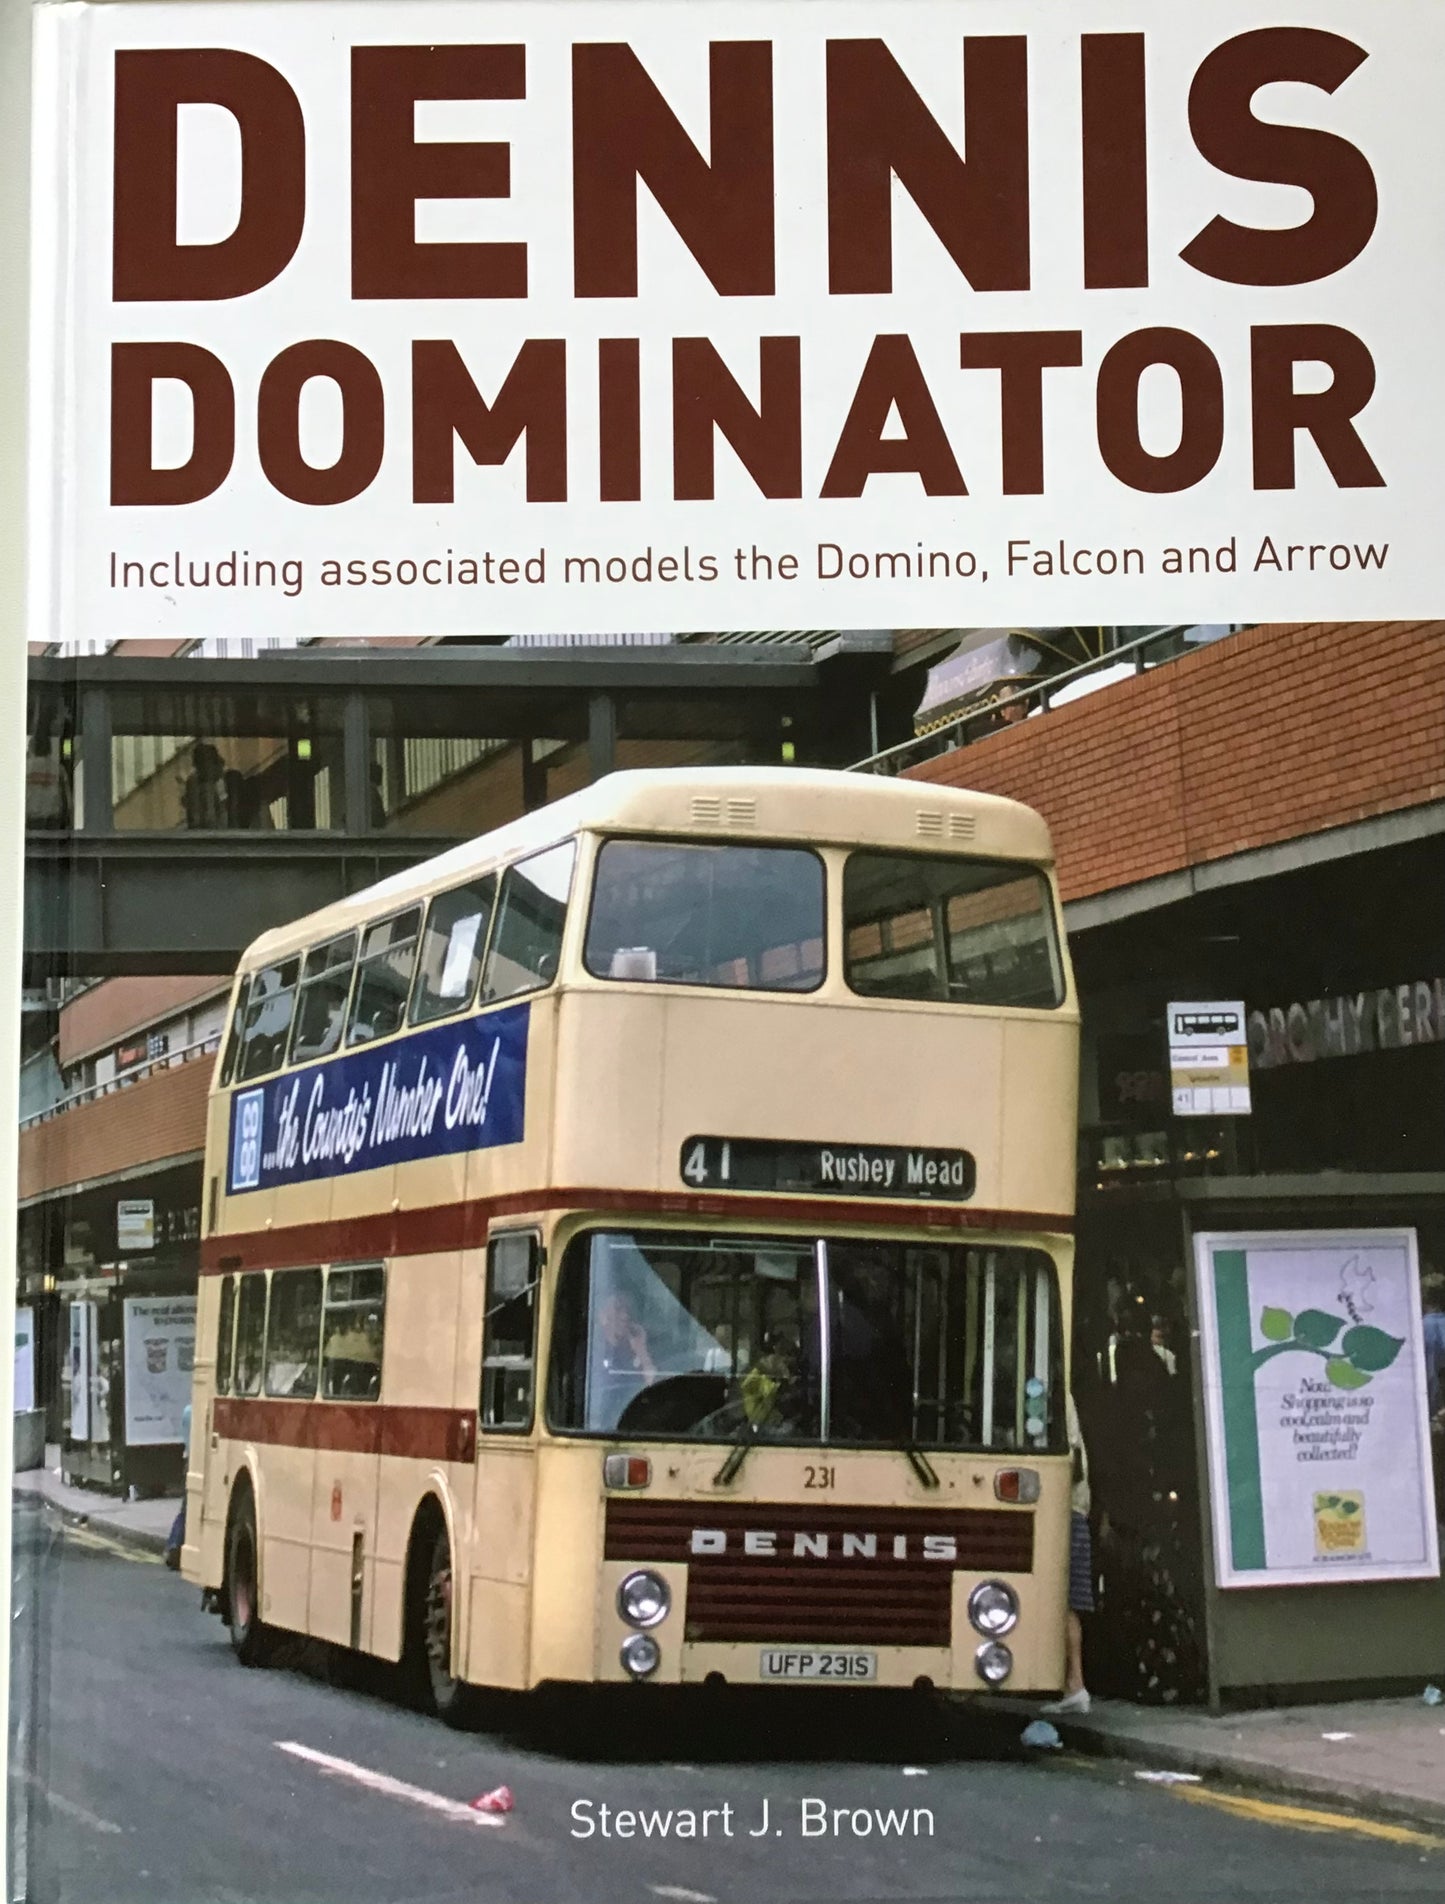 Dennis Dominator Including associated models of the Domino, Falcon and Arrow - Stewart J. Brown - Chester Model Centre